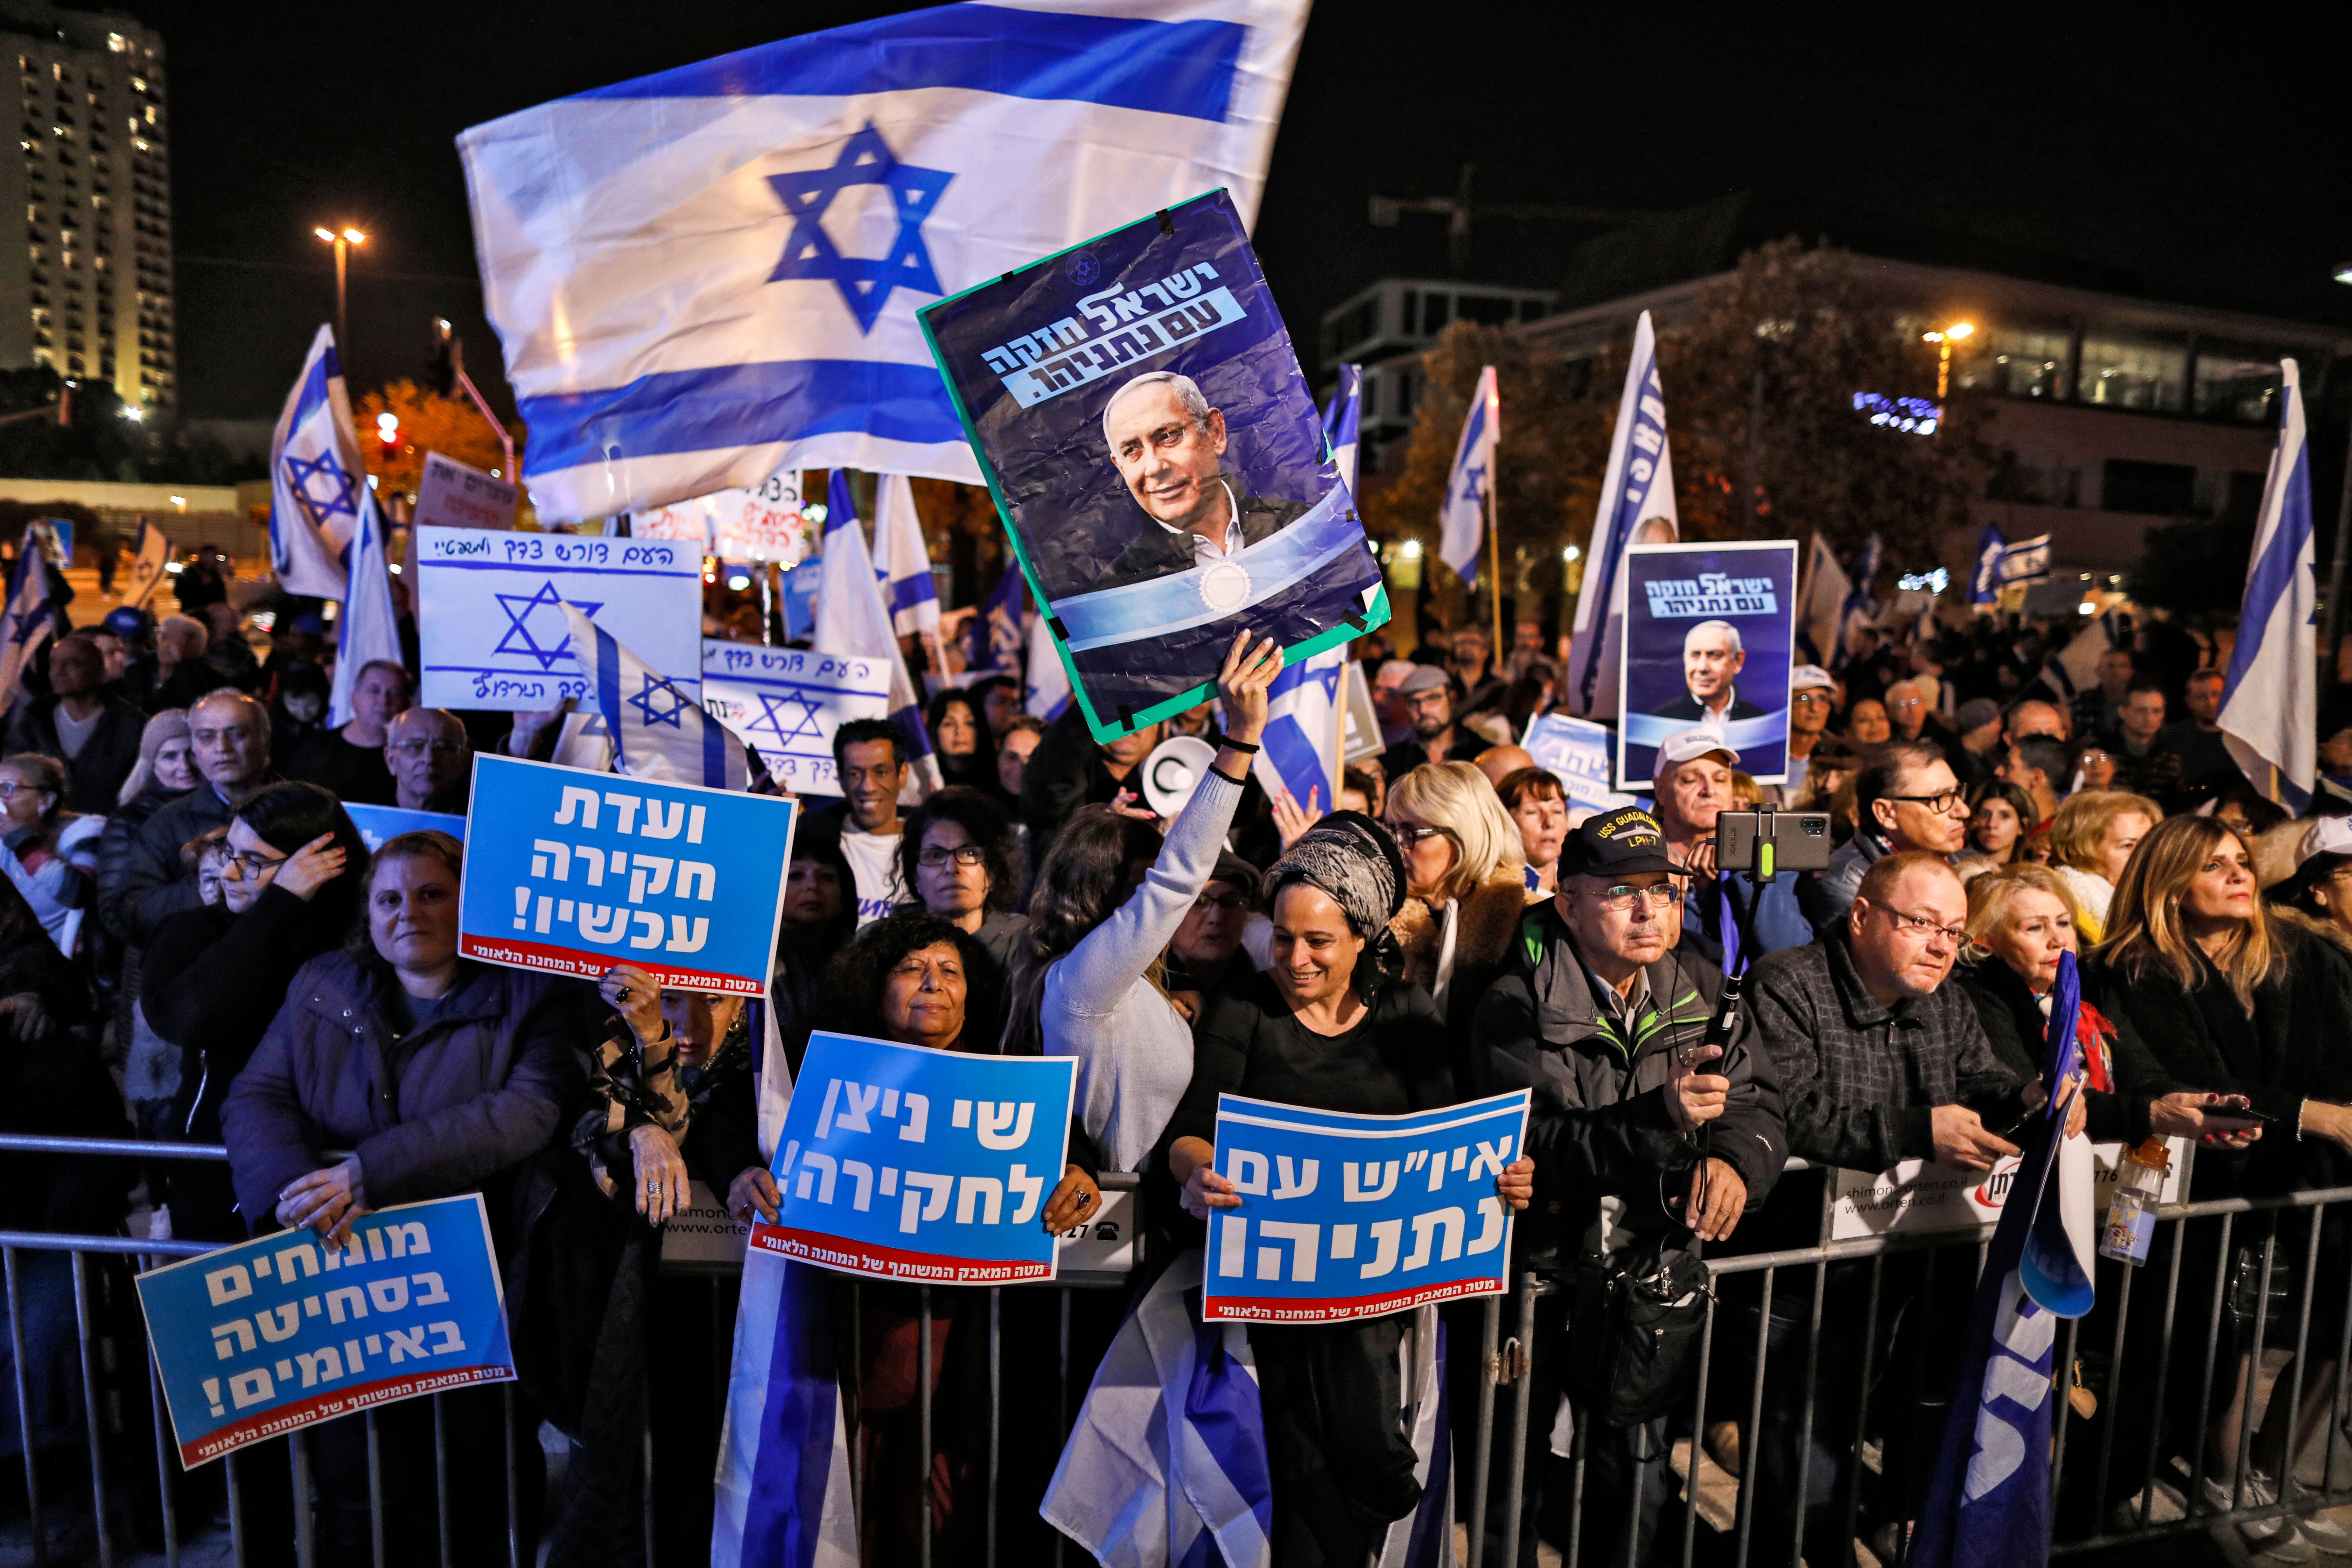 Israelis gather with signs and national flags during a demonstration in support of Prime Minister Benjamin Netanyahu in Jerusalem on December 11, 2019. (Photo by AHMAD GHARABLI / AFP) (Photo 